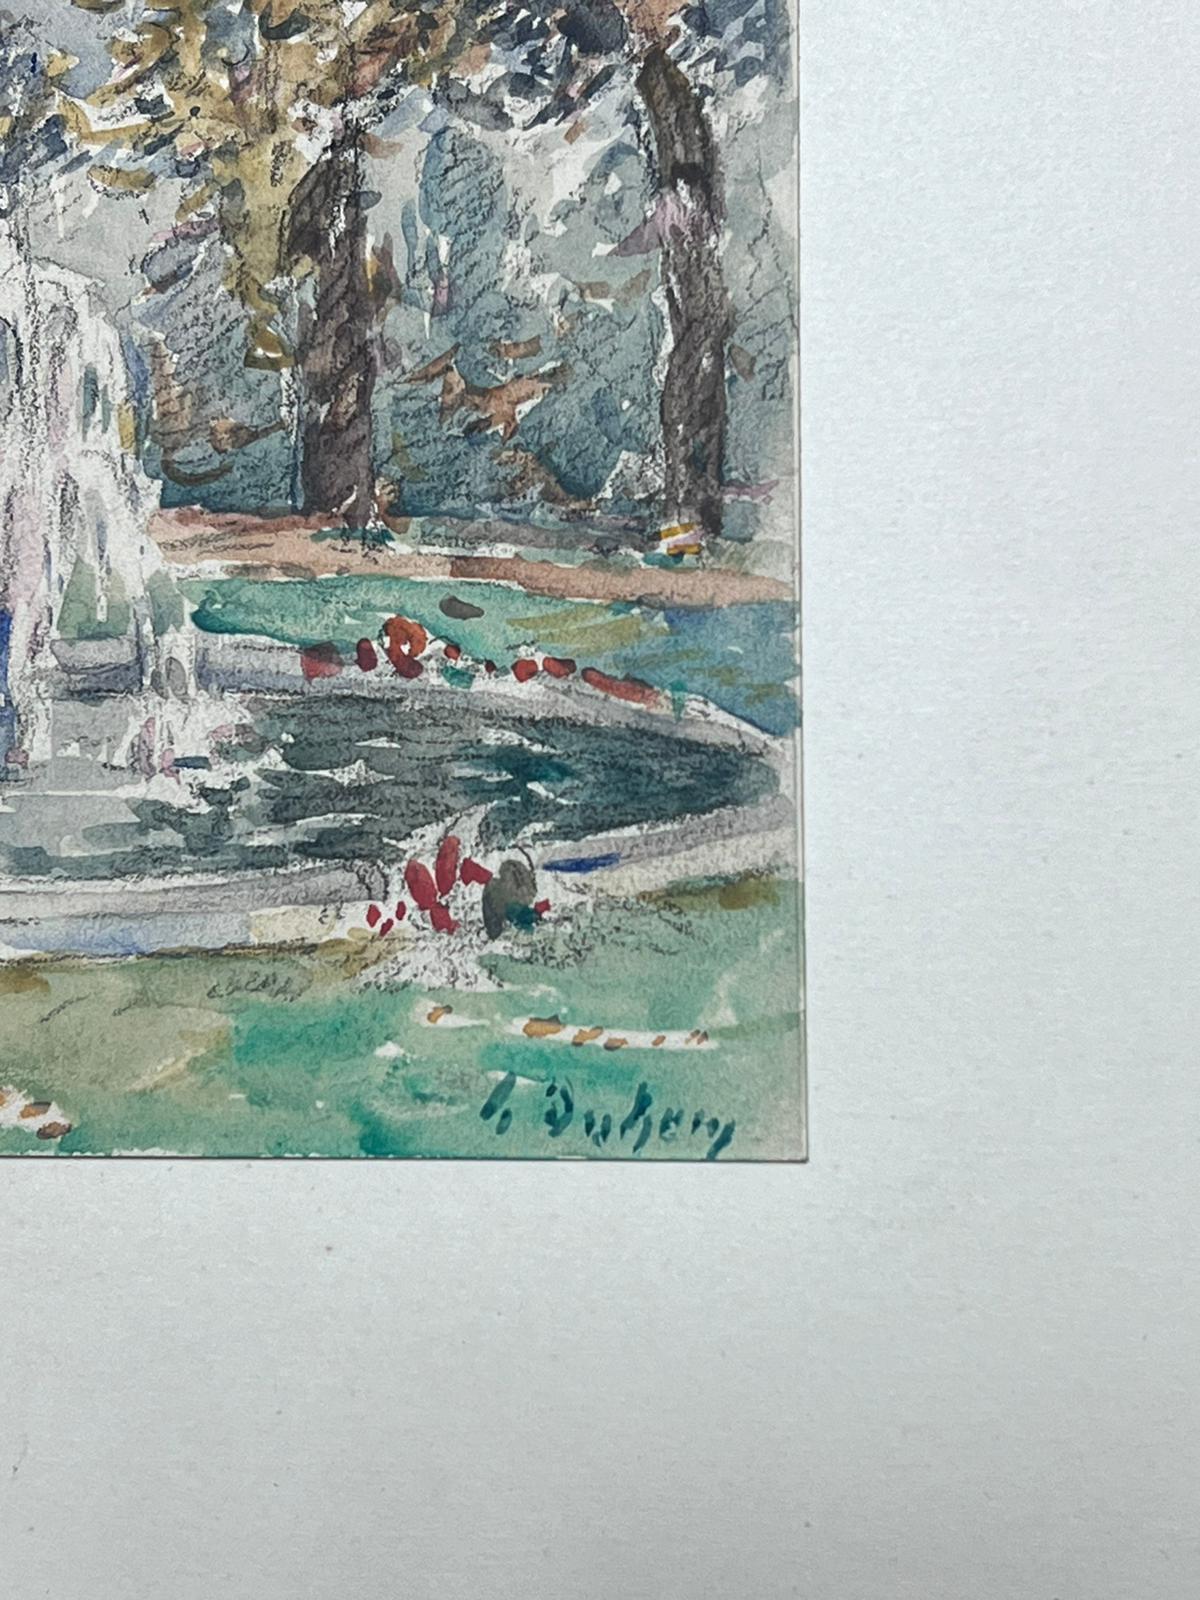 The artist: 
Henri Aime Duhem (1860-1941) French *see notes below, signed 

Title: The Park Fountain

Medium:  
signed gouache on paper, loosely laid over card, unframed

card: 10 x 13 inches
painting: 4.25 x 9.5 inches

Provenance: 
private